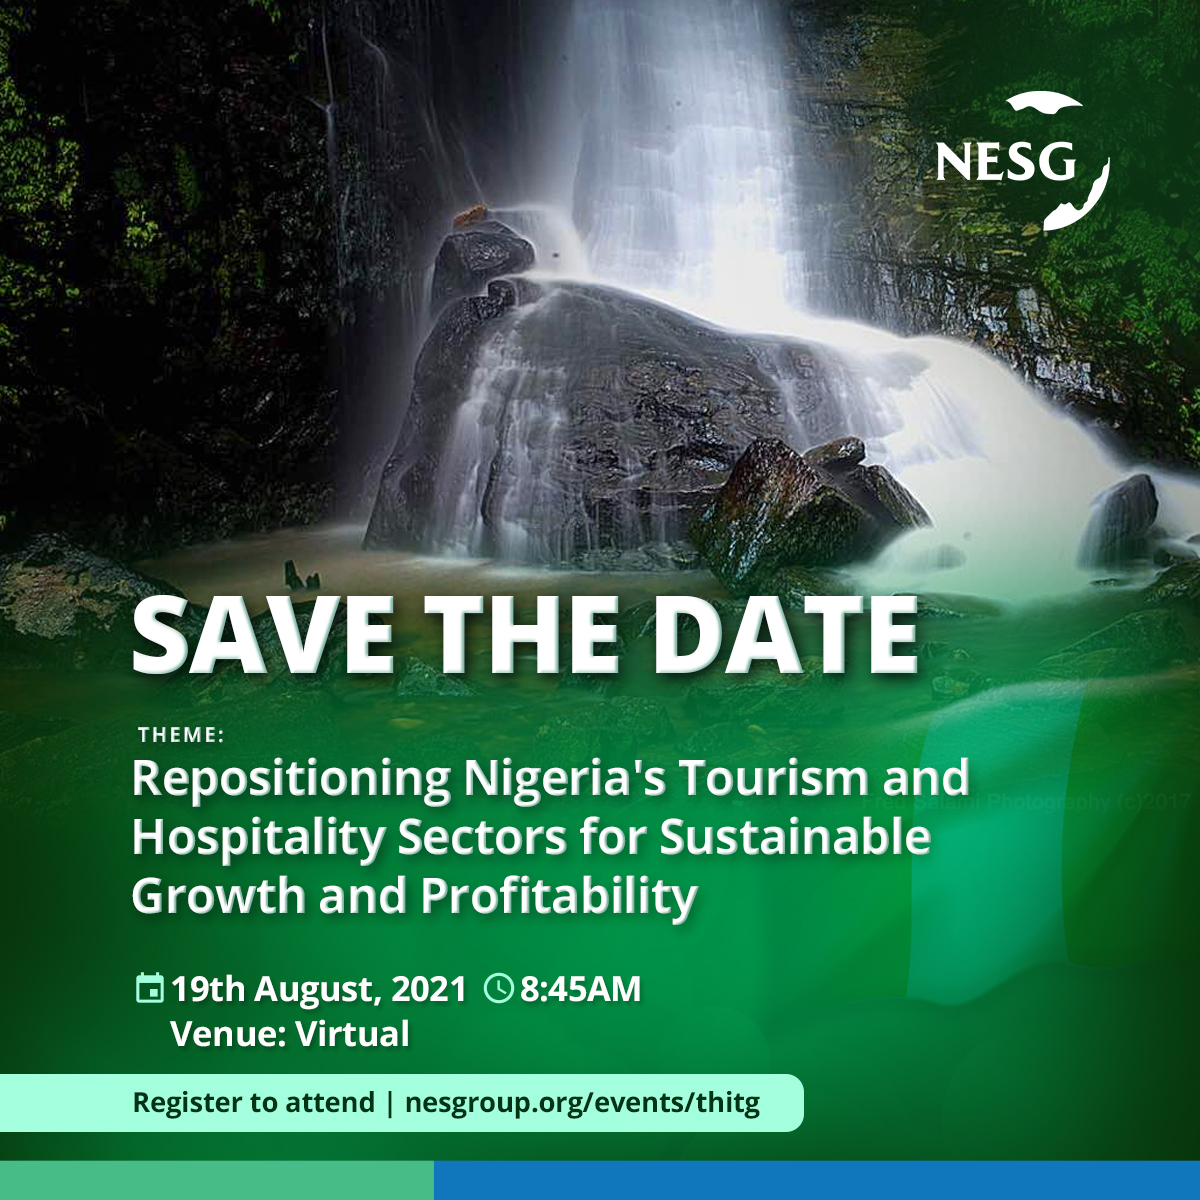 Tourism, Hospitality, Entertainment, Creatives & Sports Industries, The Nigerian Economic Summit Group, The NESG, think-tank, think, tank, nigeria, policy, nesg, africa, number one think in africa, best think in nigeria, the best think tank in africa, top 10 think tanks in nigeria, think tank nigeria, economy, business, PPD, public, private, dialogue, Nigeria, Nigeria PPD, NIGERIA, PPD